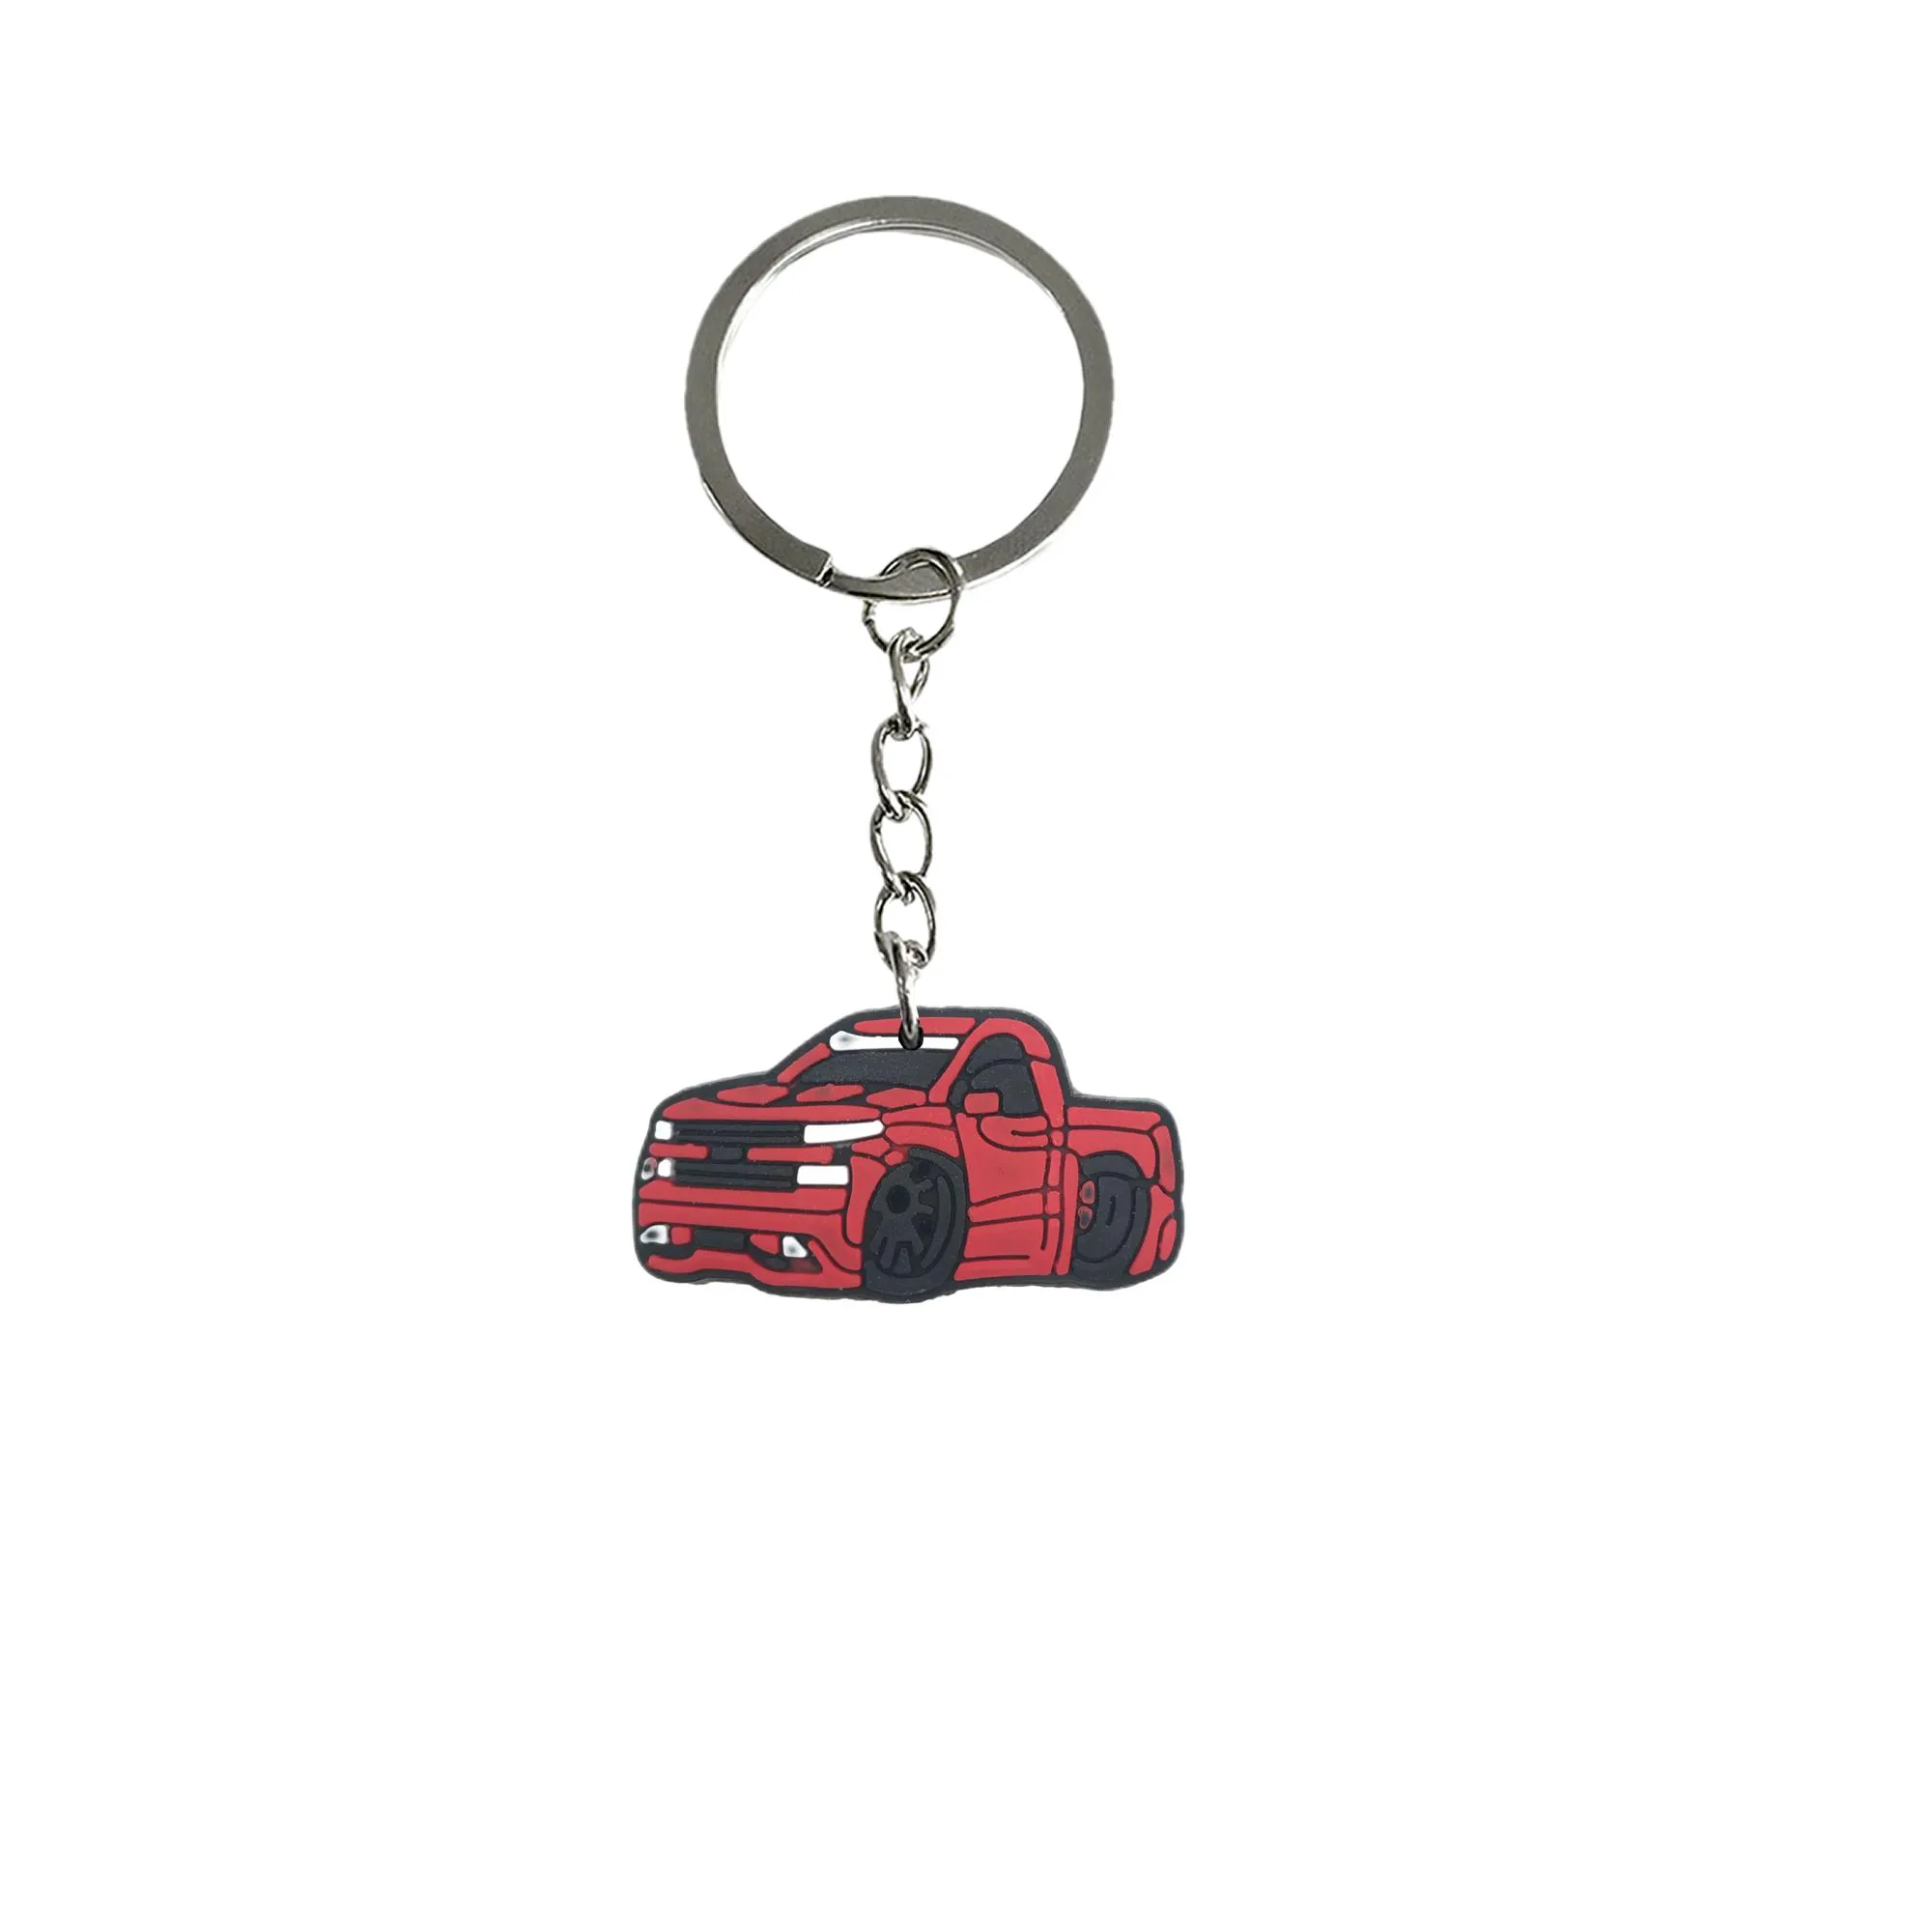 car collection keychain for kids party favors cool colorful anime character with wristlet keychains girls keyring suitable schoolbag key chain rings kid boy girl gift